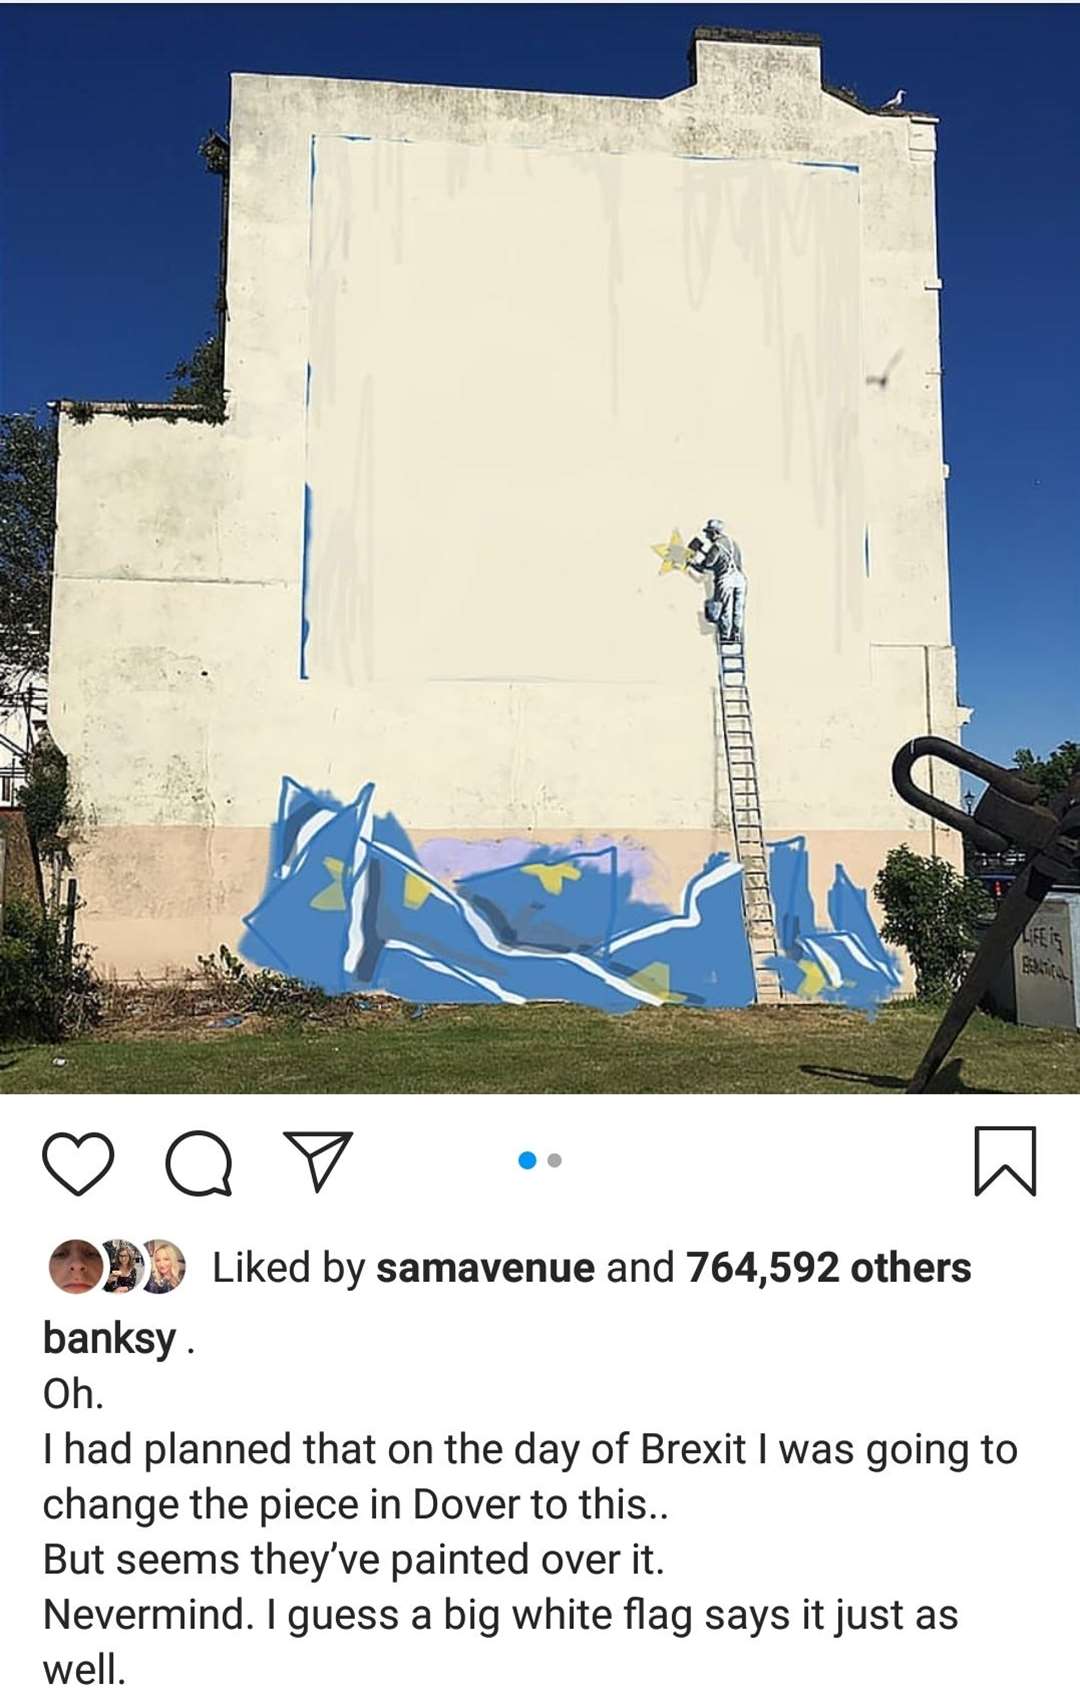 Banksy later mentioned his plans for the mural on Instagram, complete with a comment on the removal